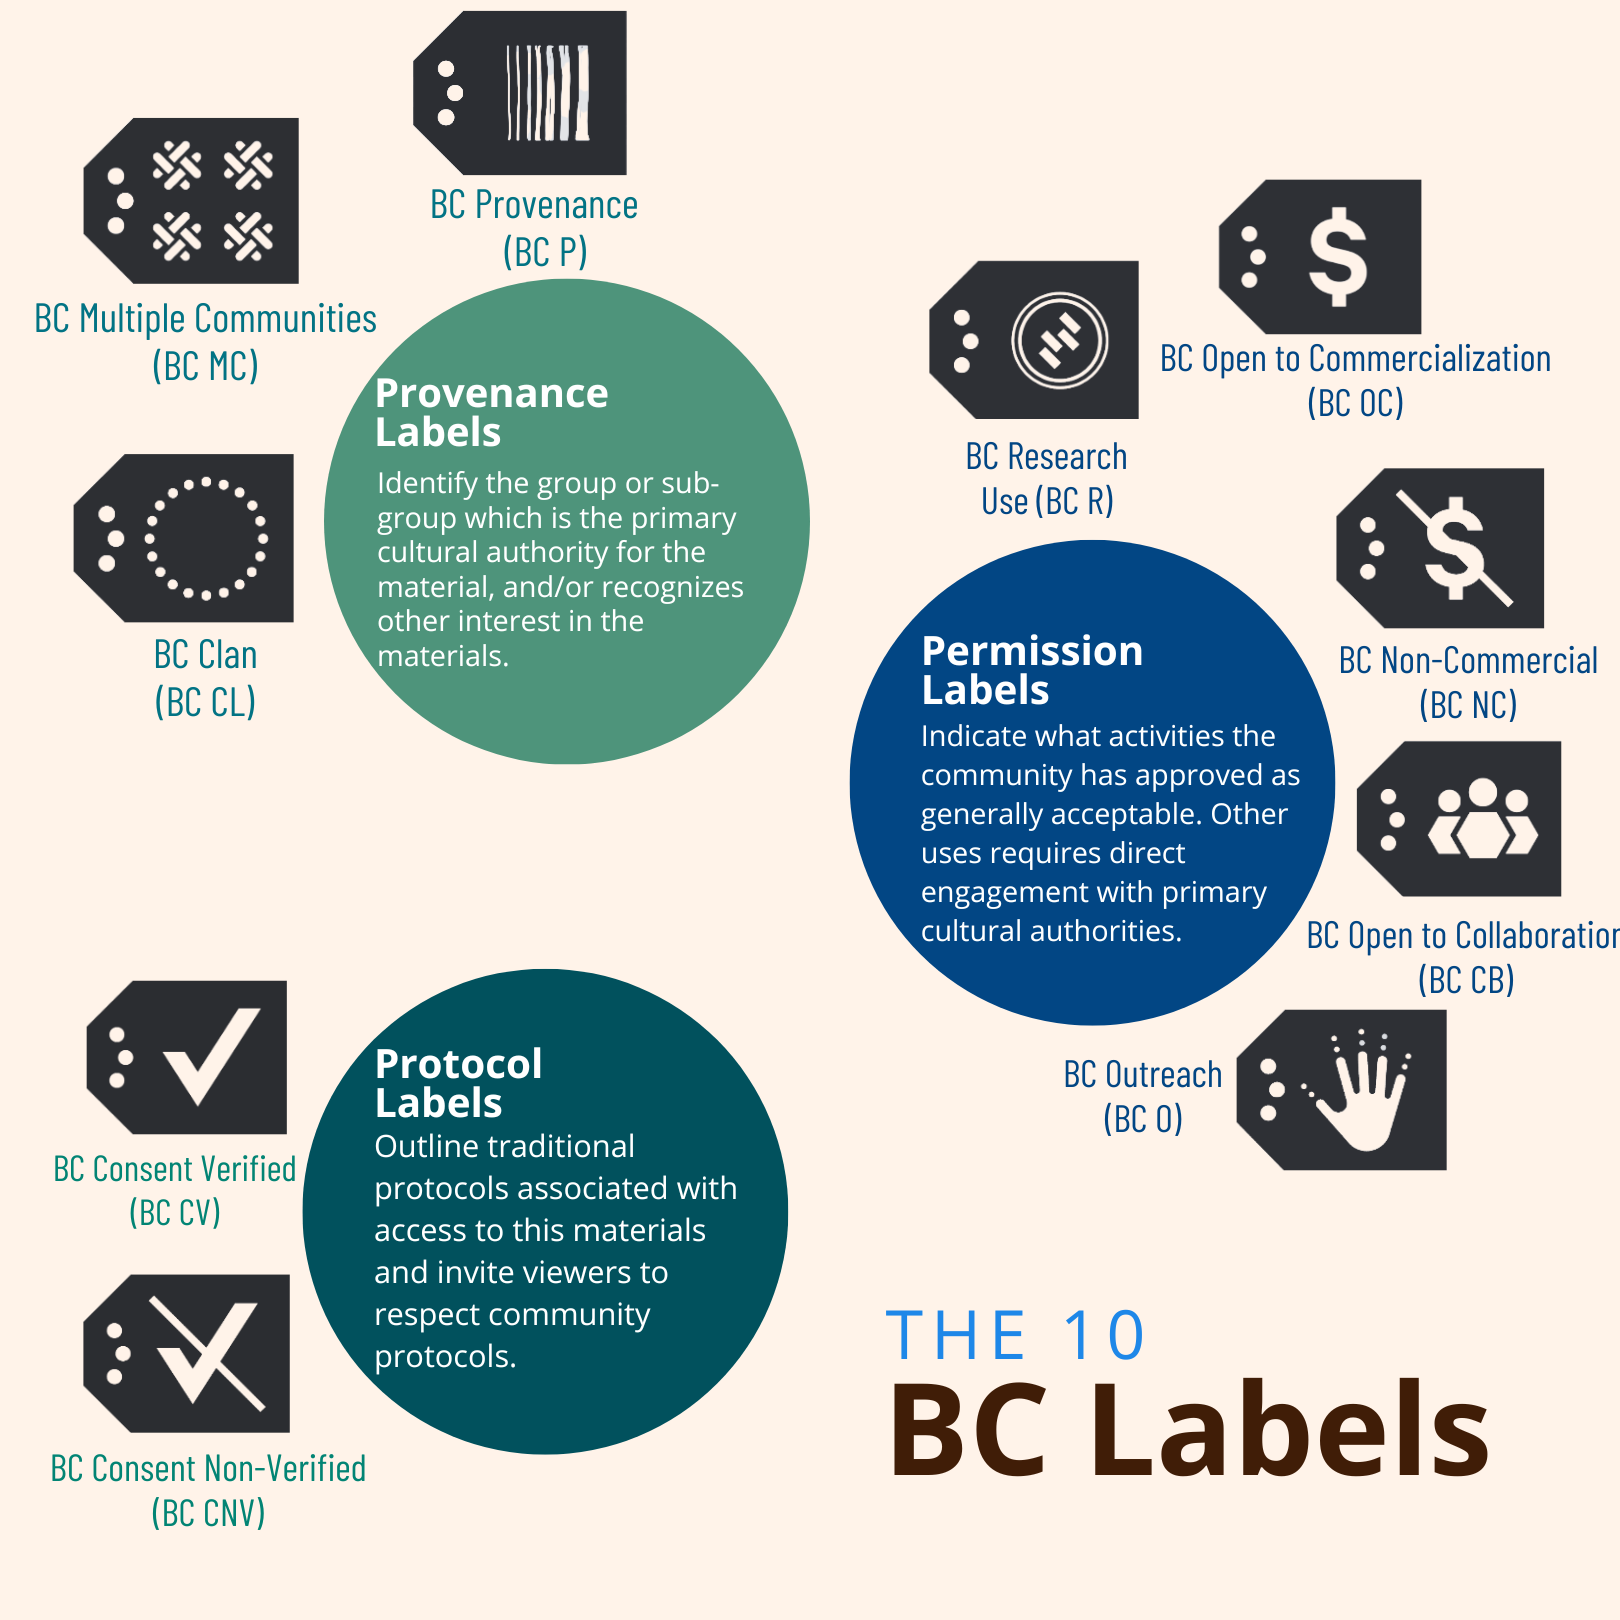 The 10 BC Labels developed by Jane Anderson and Maui Hudson, adapted by Phoebe Racine